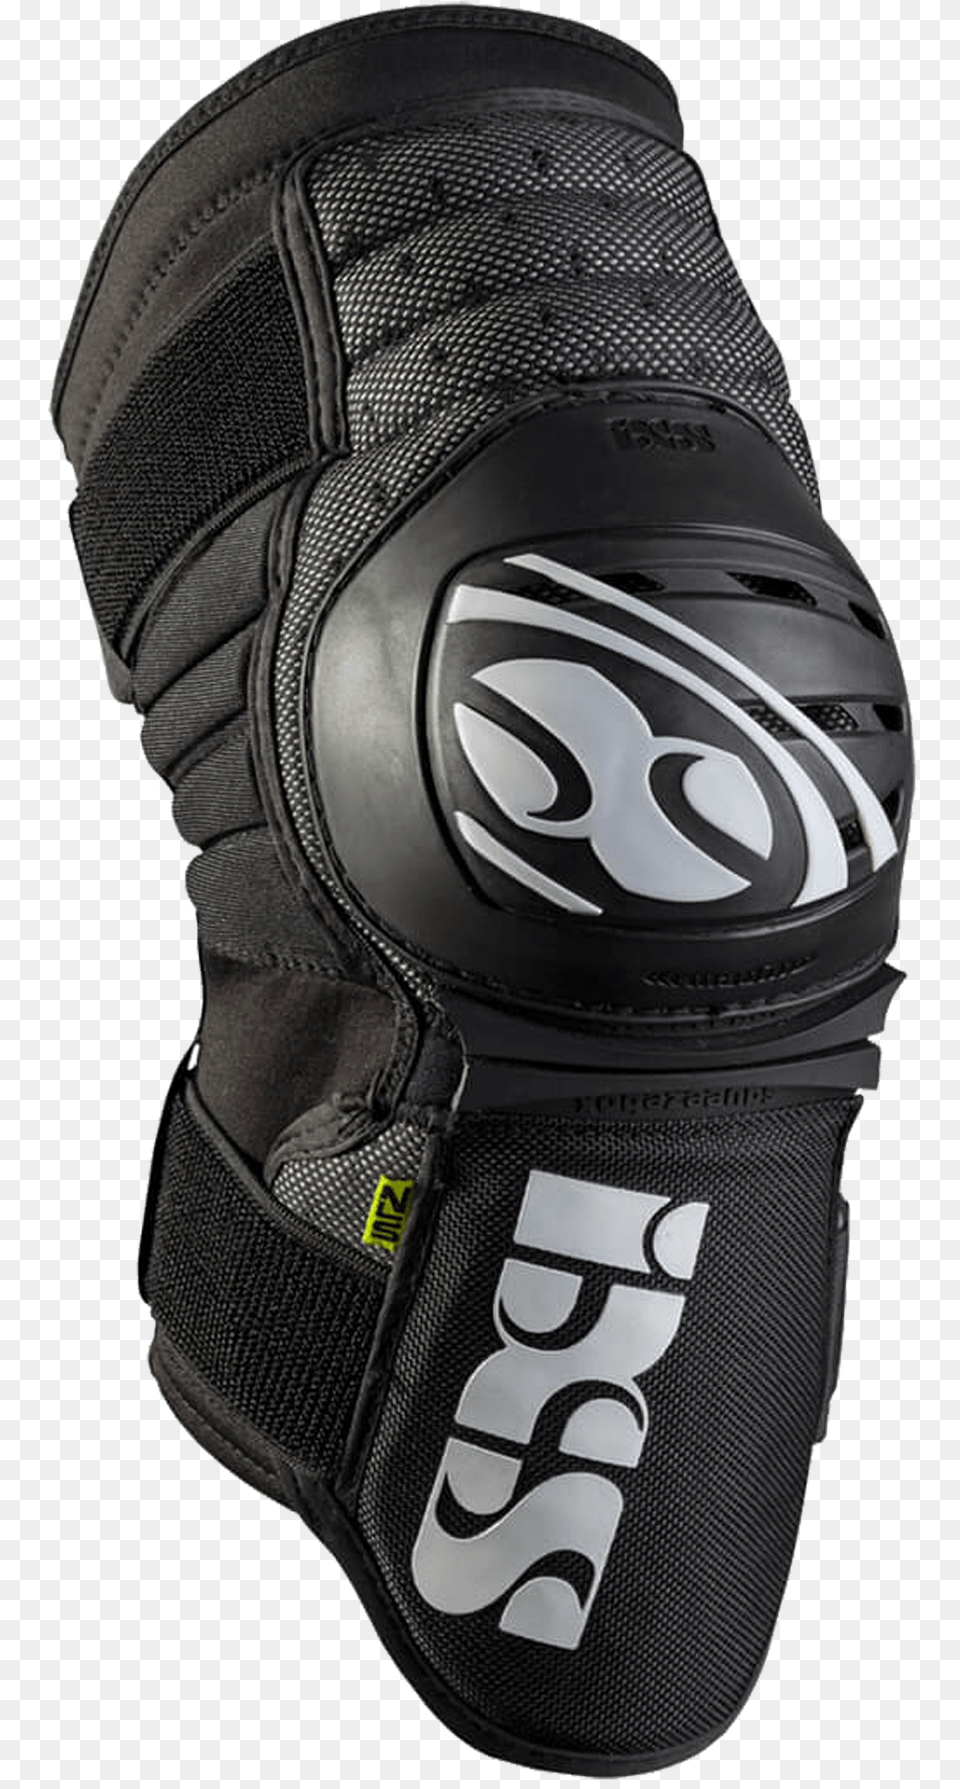 Ixs The Dagger Knee Pads Ixs Dagger Knee Pads, Brace, Person, Clothing, Glove Free Transparent Png